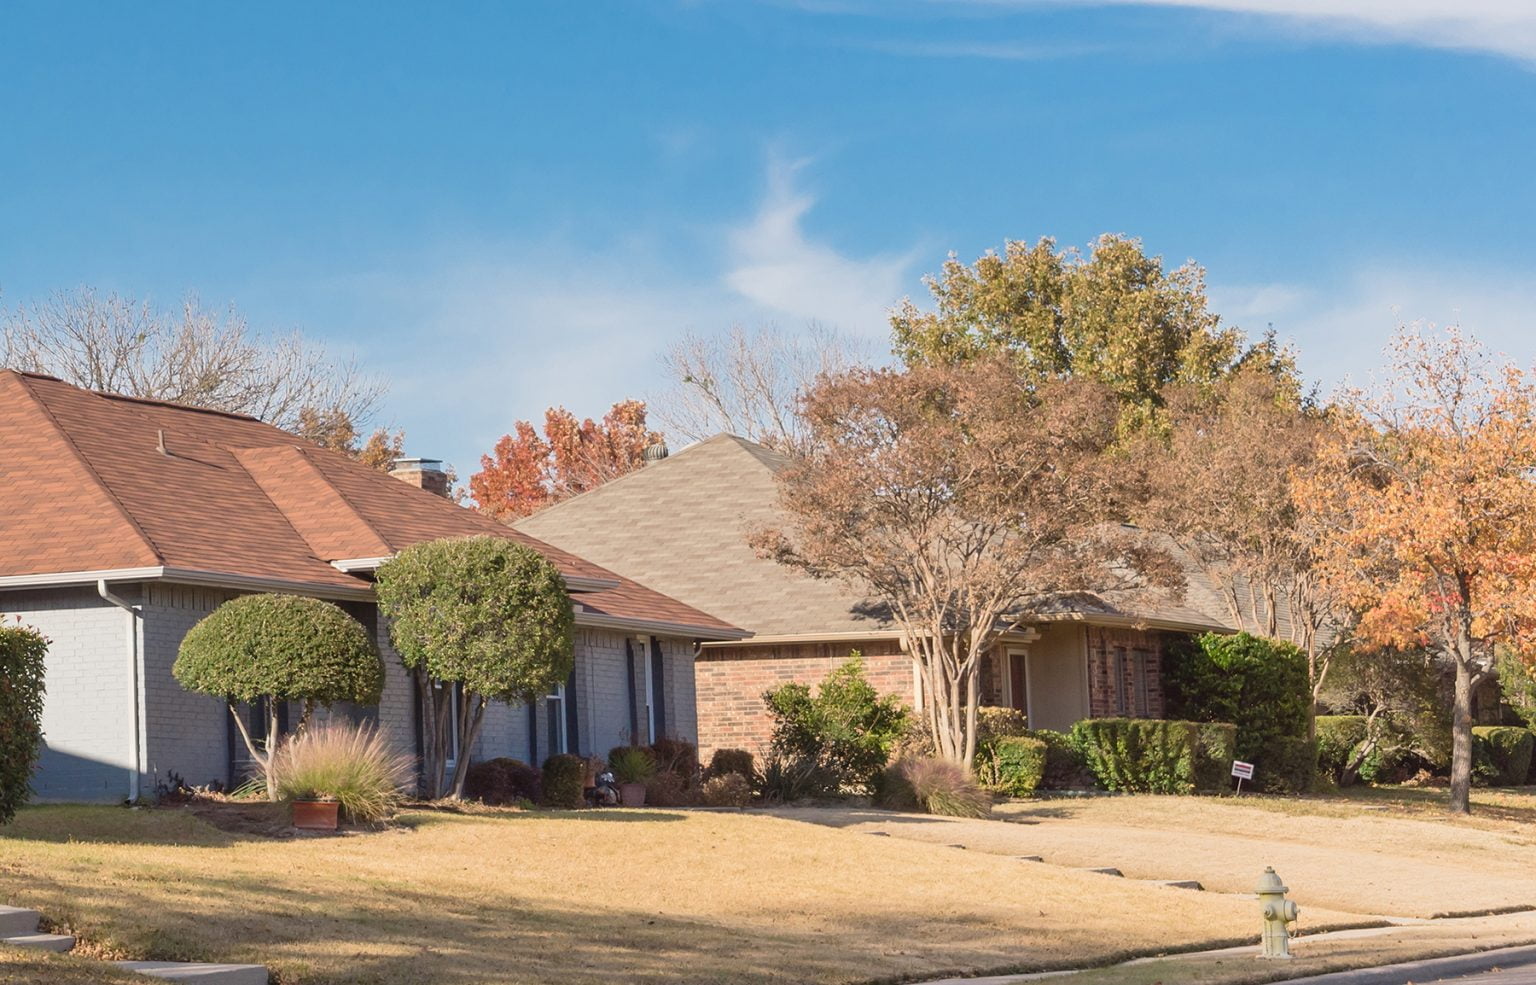 Panoramic single story bungalow houses in suburbs of Dallas with bright fall foliage colors